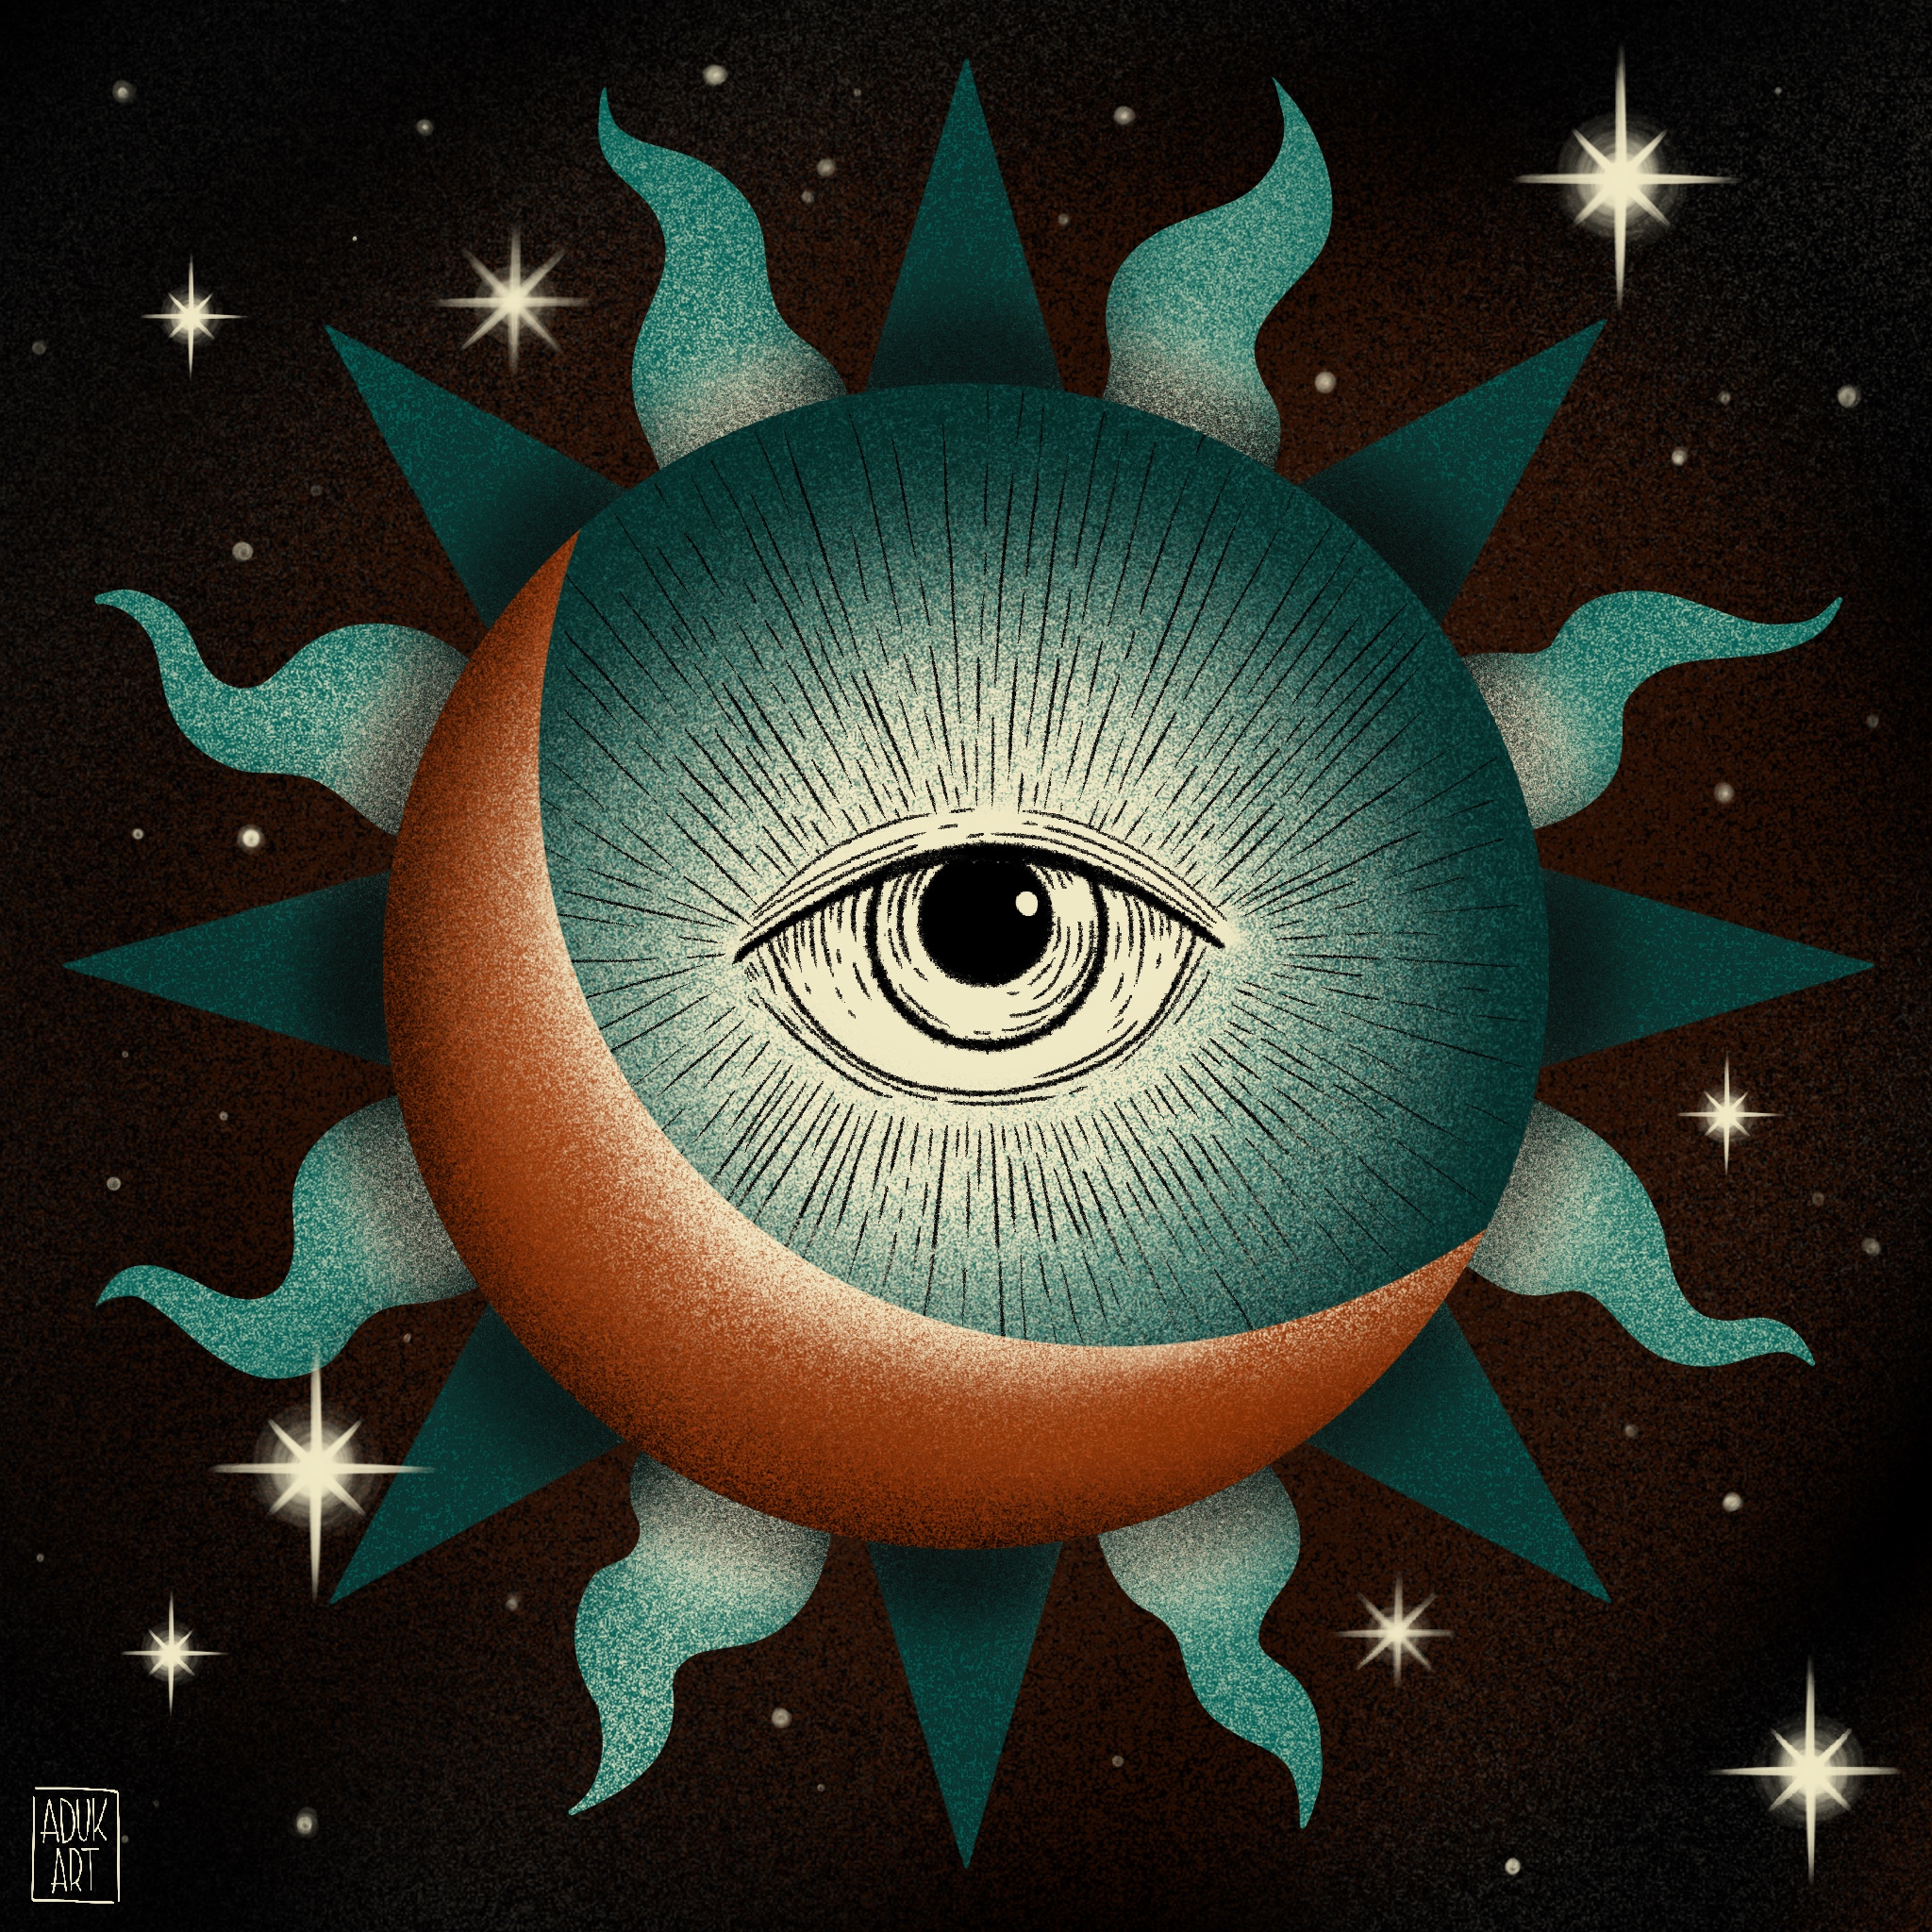 Astrology illustration aun and moon with eye